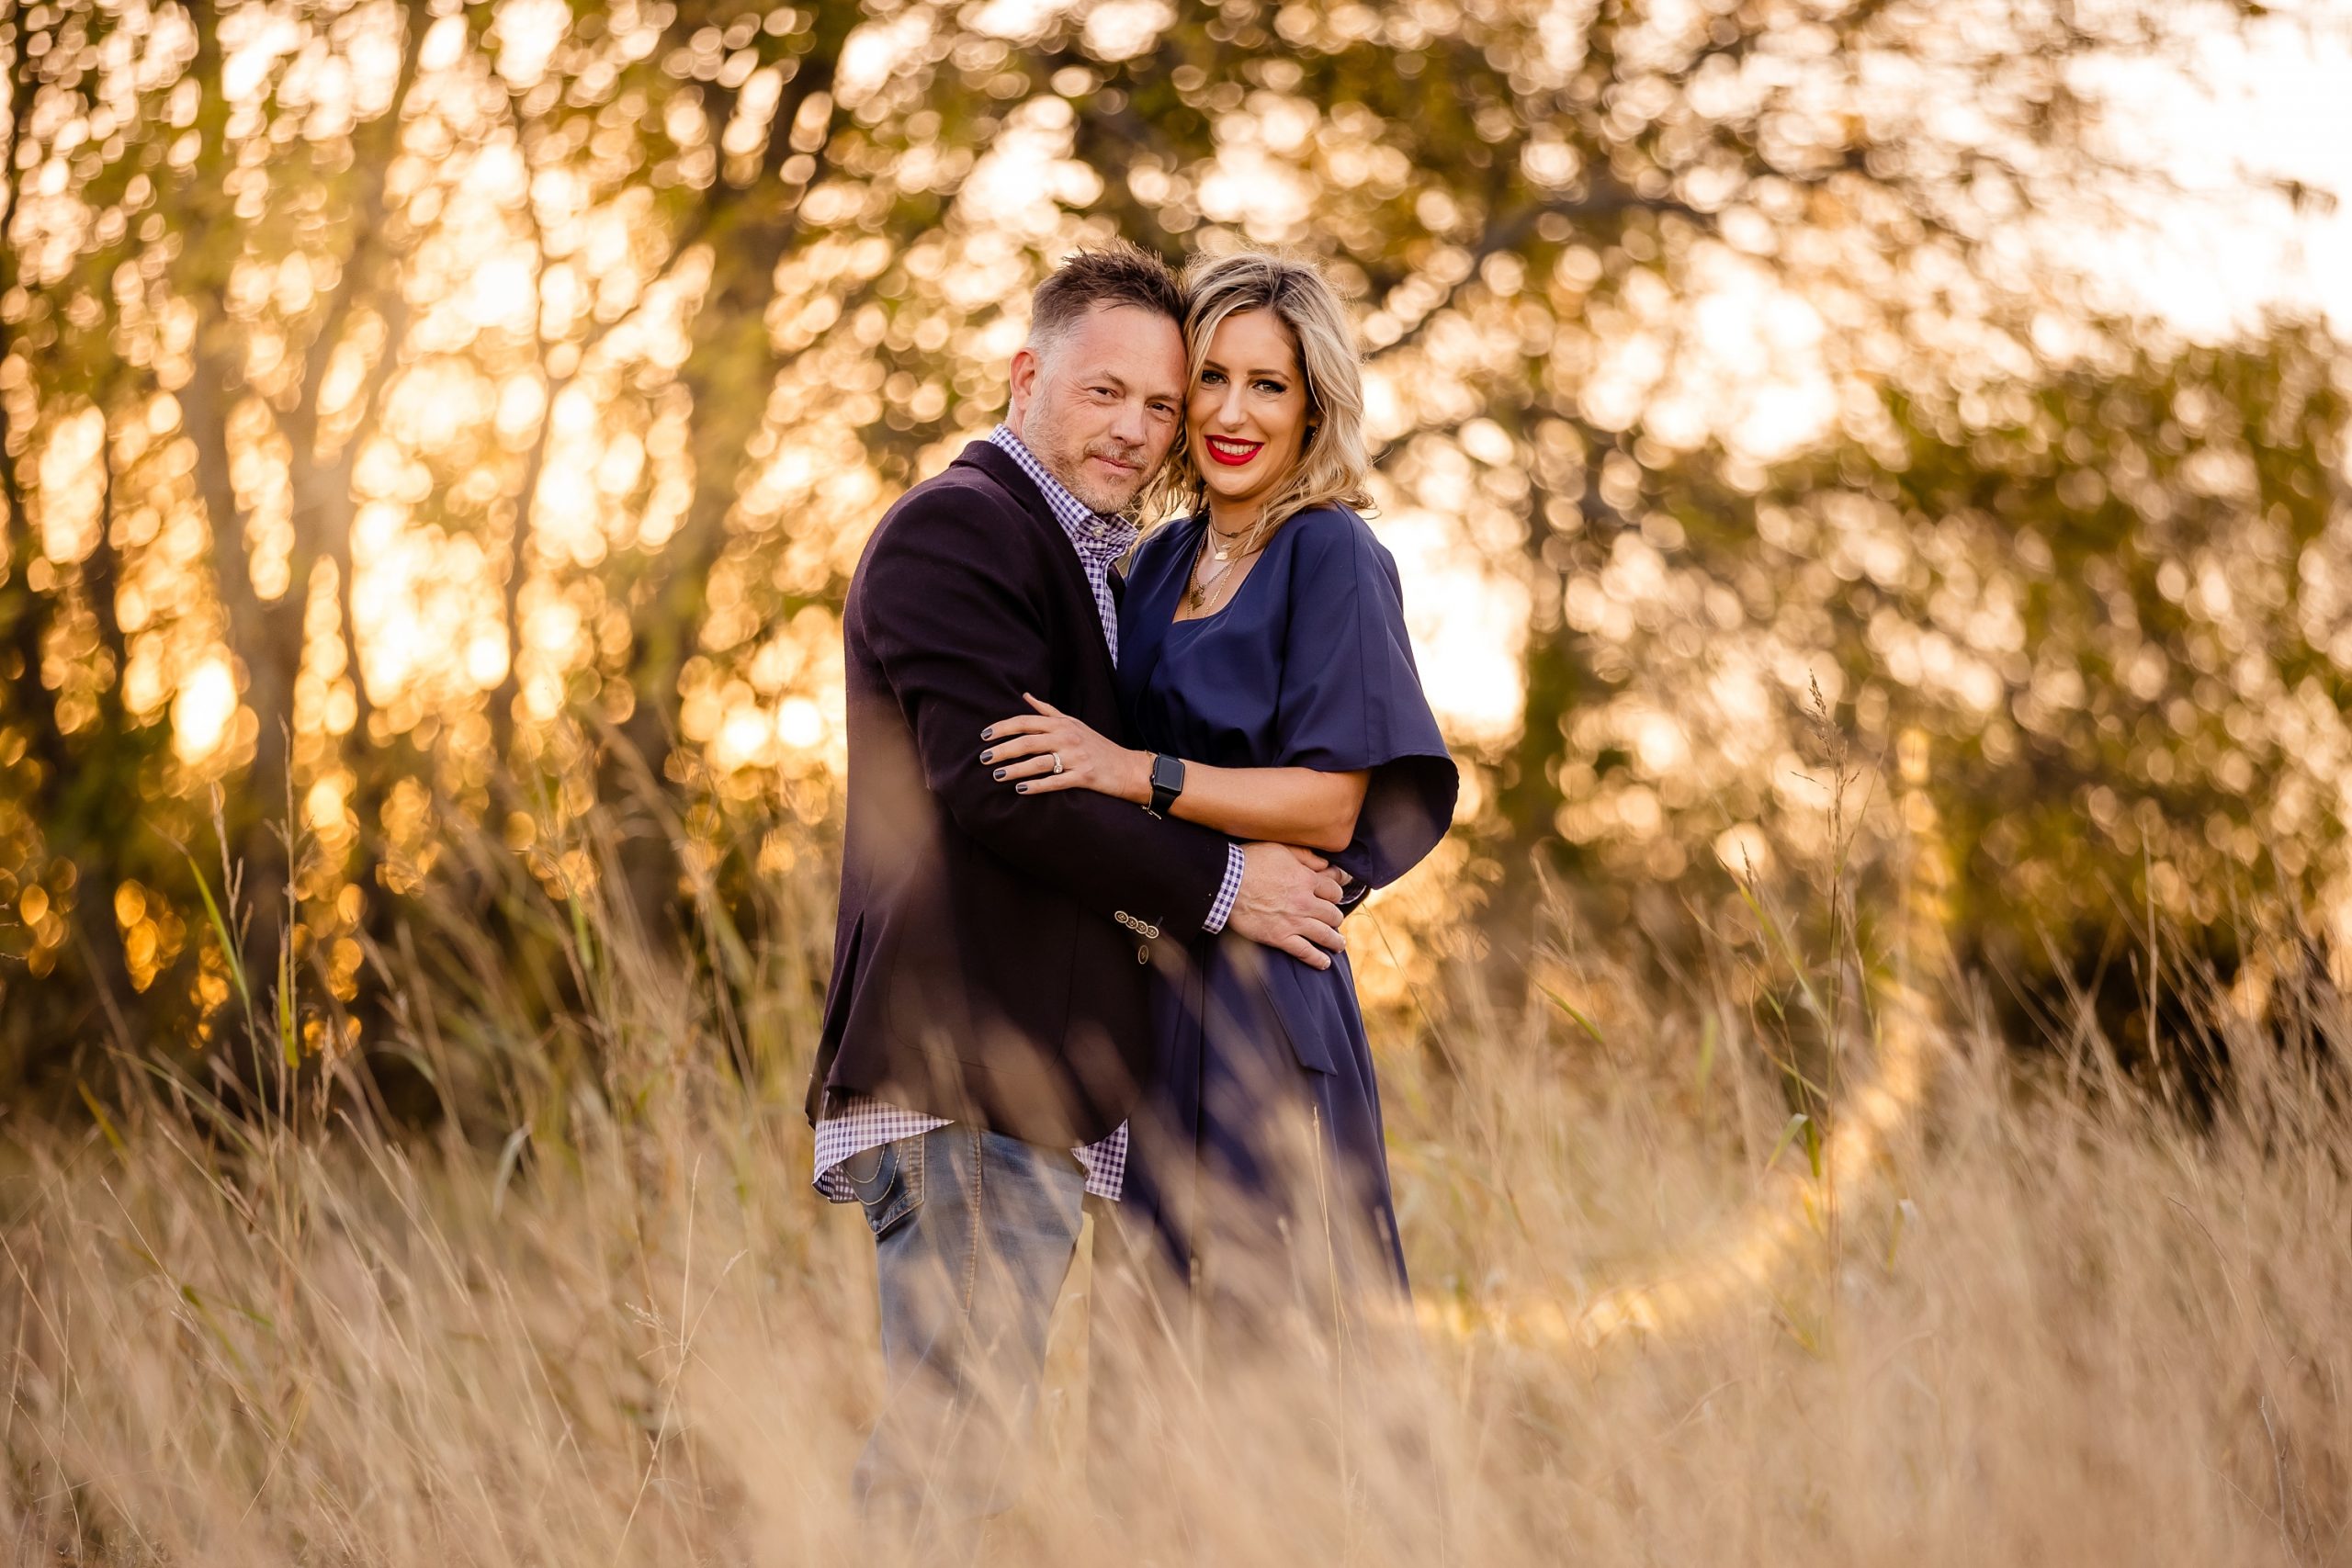 jessica rambo photography, family photography, family photographer, fort worth portrait photographer, fort worth portrait photography, fort worth family photographer, fort worth family photography, family photographer in fort worth, fort worth photo session, fort worth photo locations